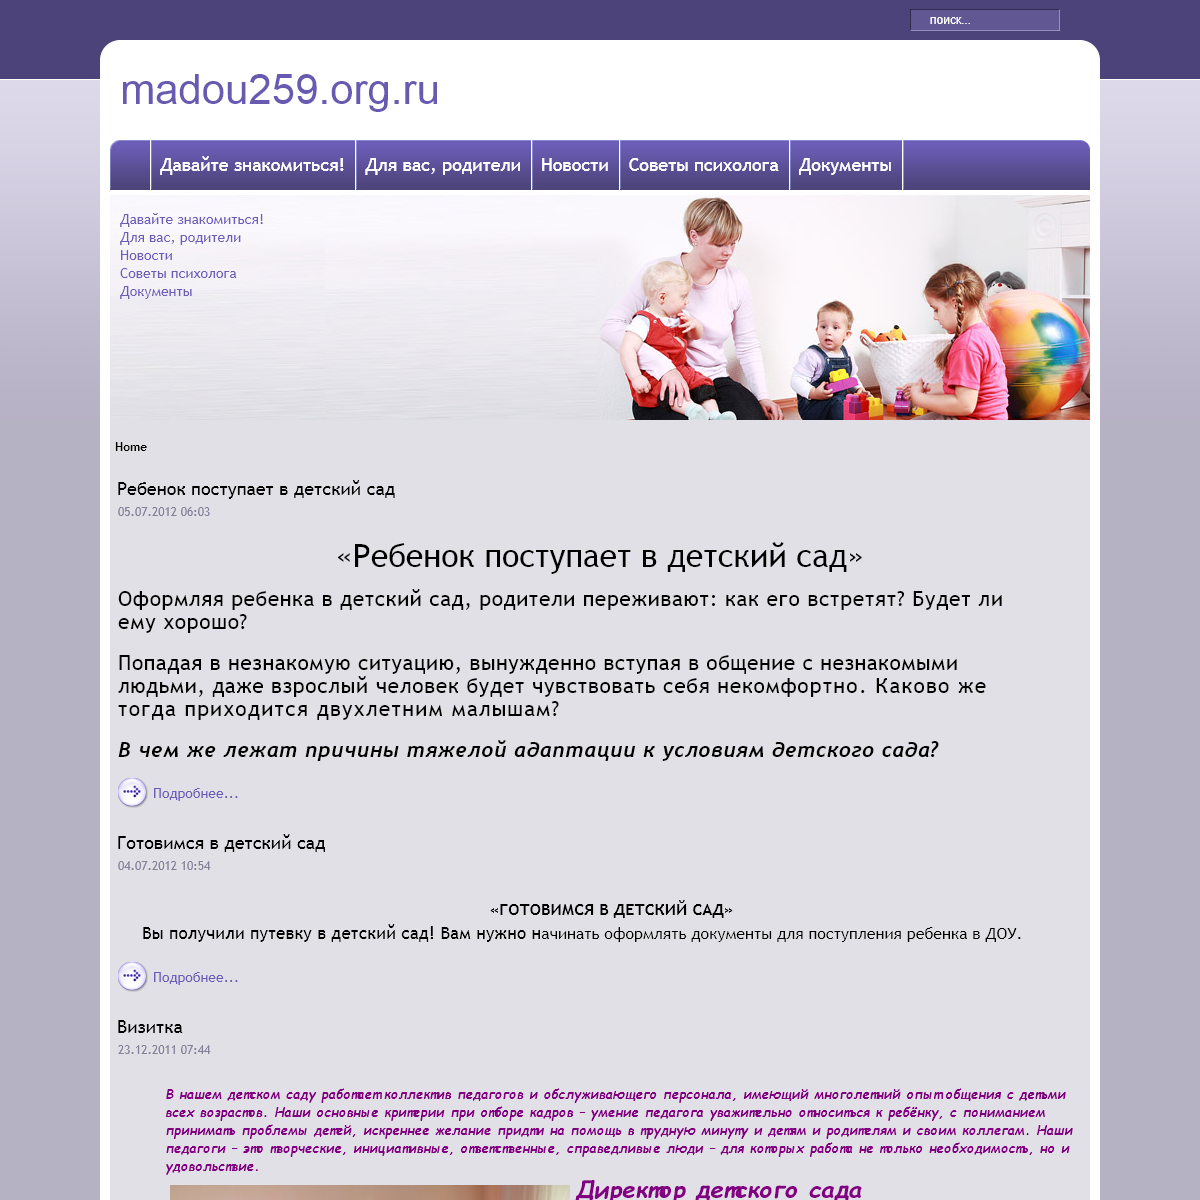 A complete backup of madou259.org.ru